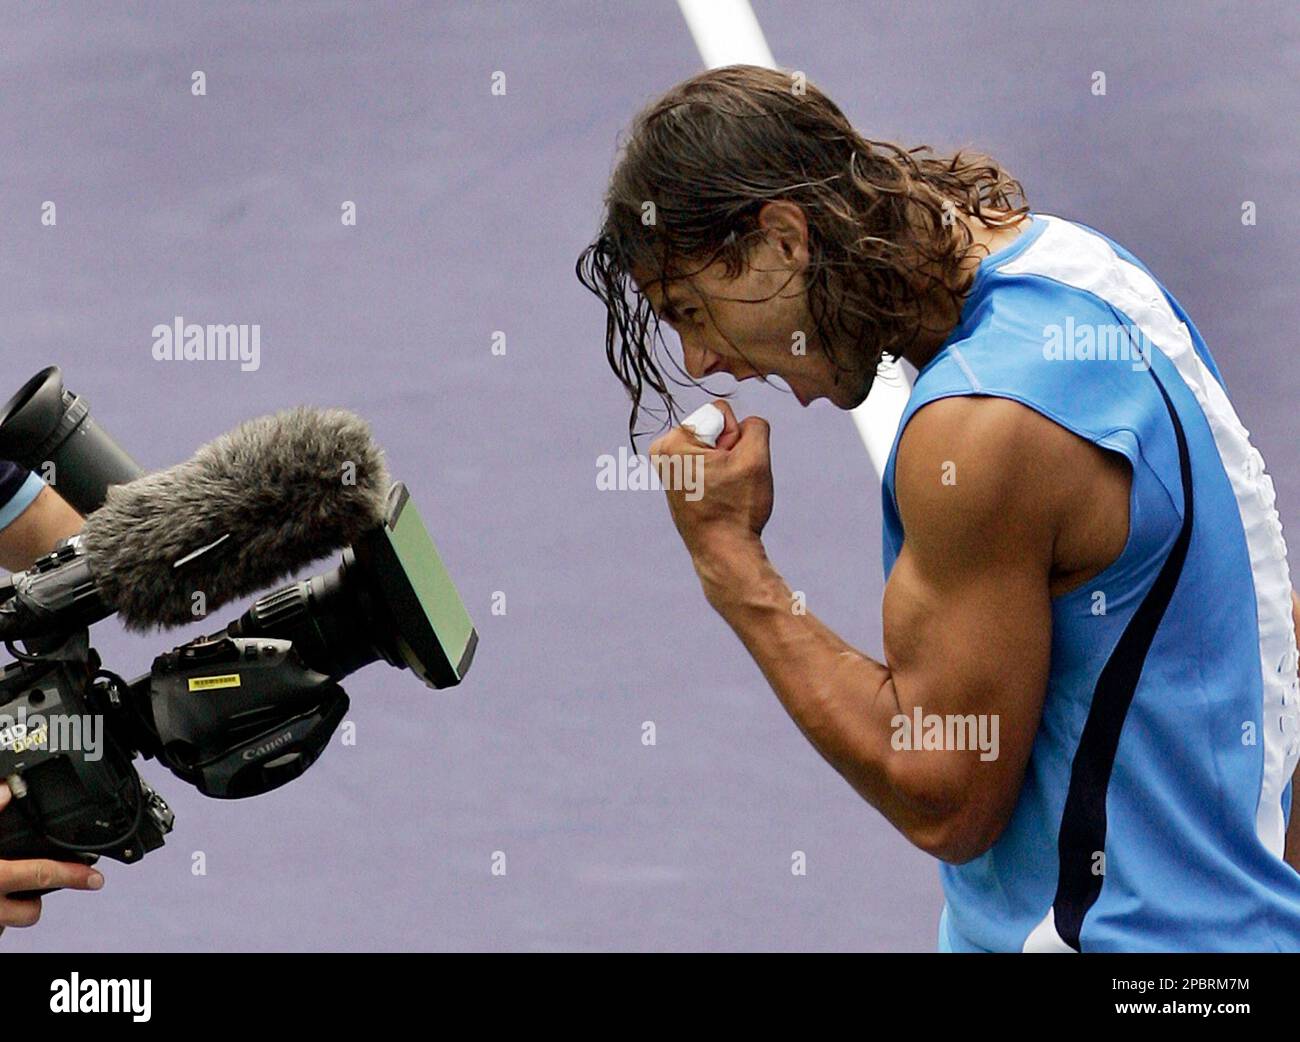 Rafael Nadal of Spain reacts to a TV camera after defeating Andy Roddick of the USA, 6-4, 6-3, in their semifinal match at the Pacific Life Open tennis tournament in Indian Wells,